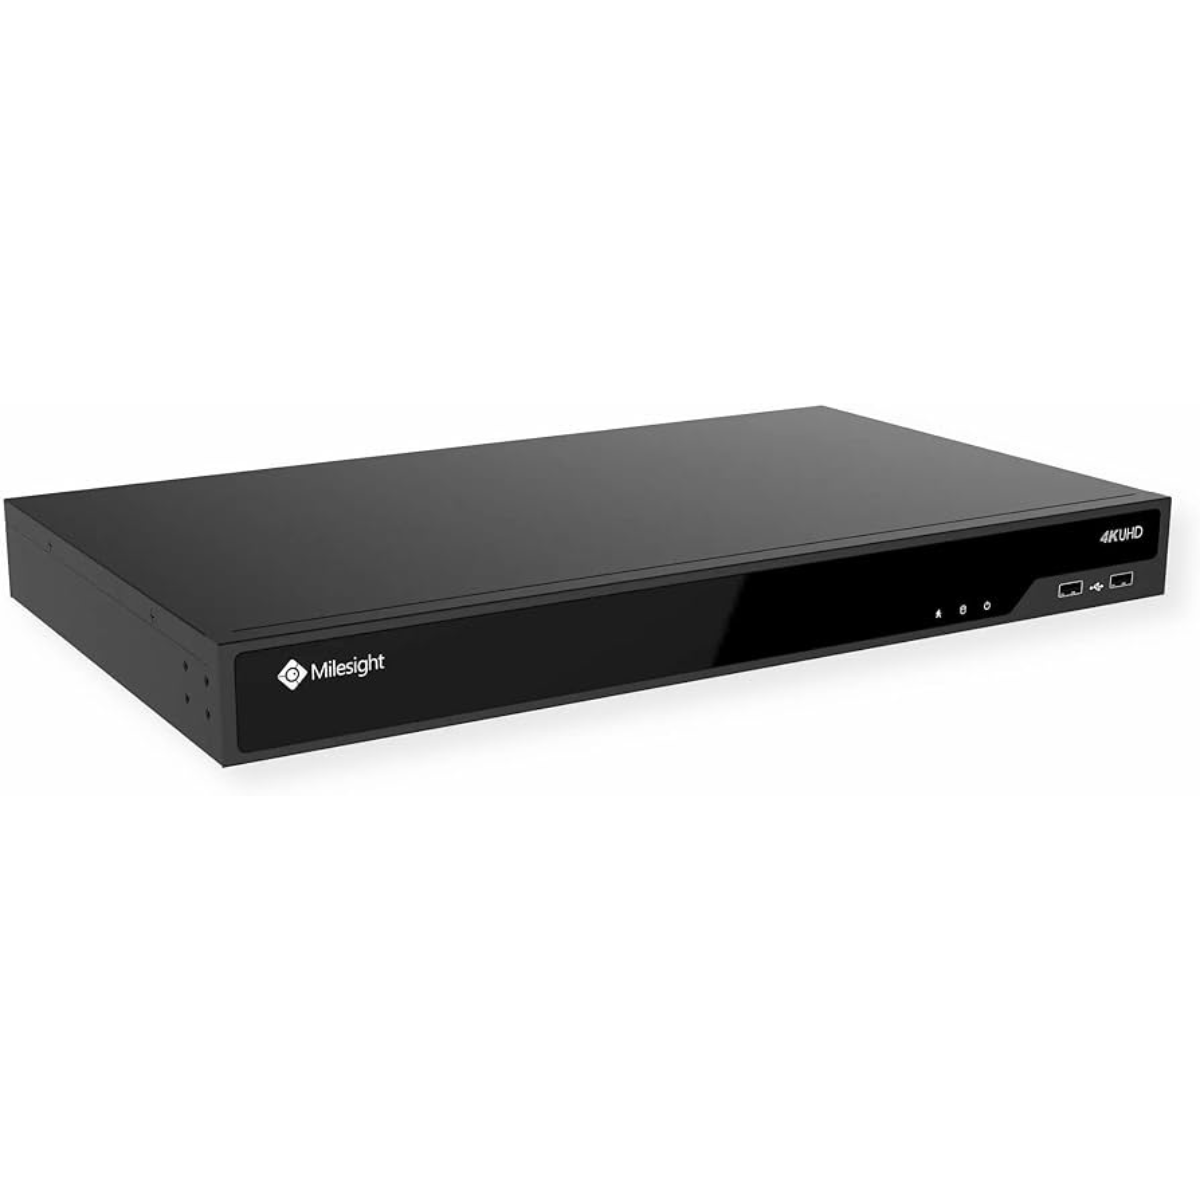 High-capacity 8-Channel NVR with 2x10TB Storage and HDMI/VGA Output